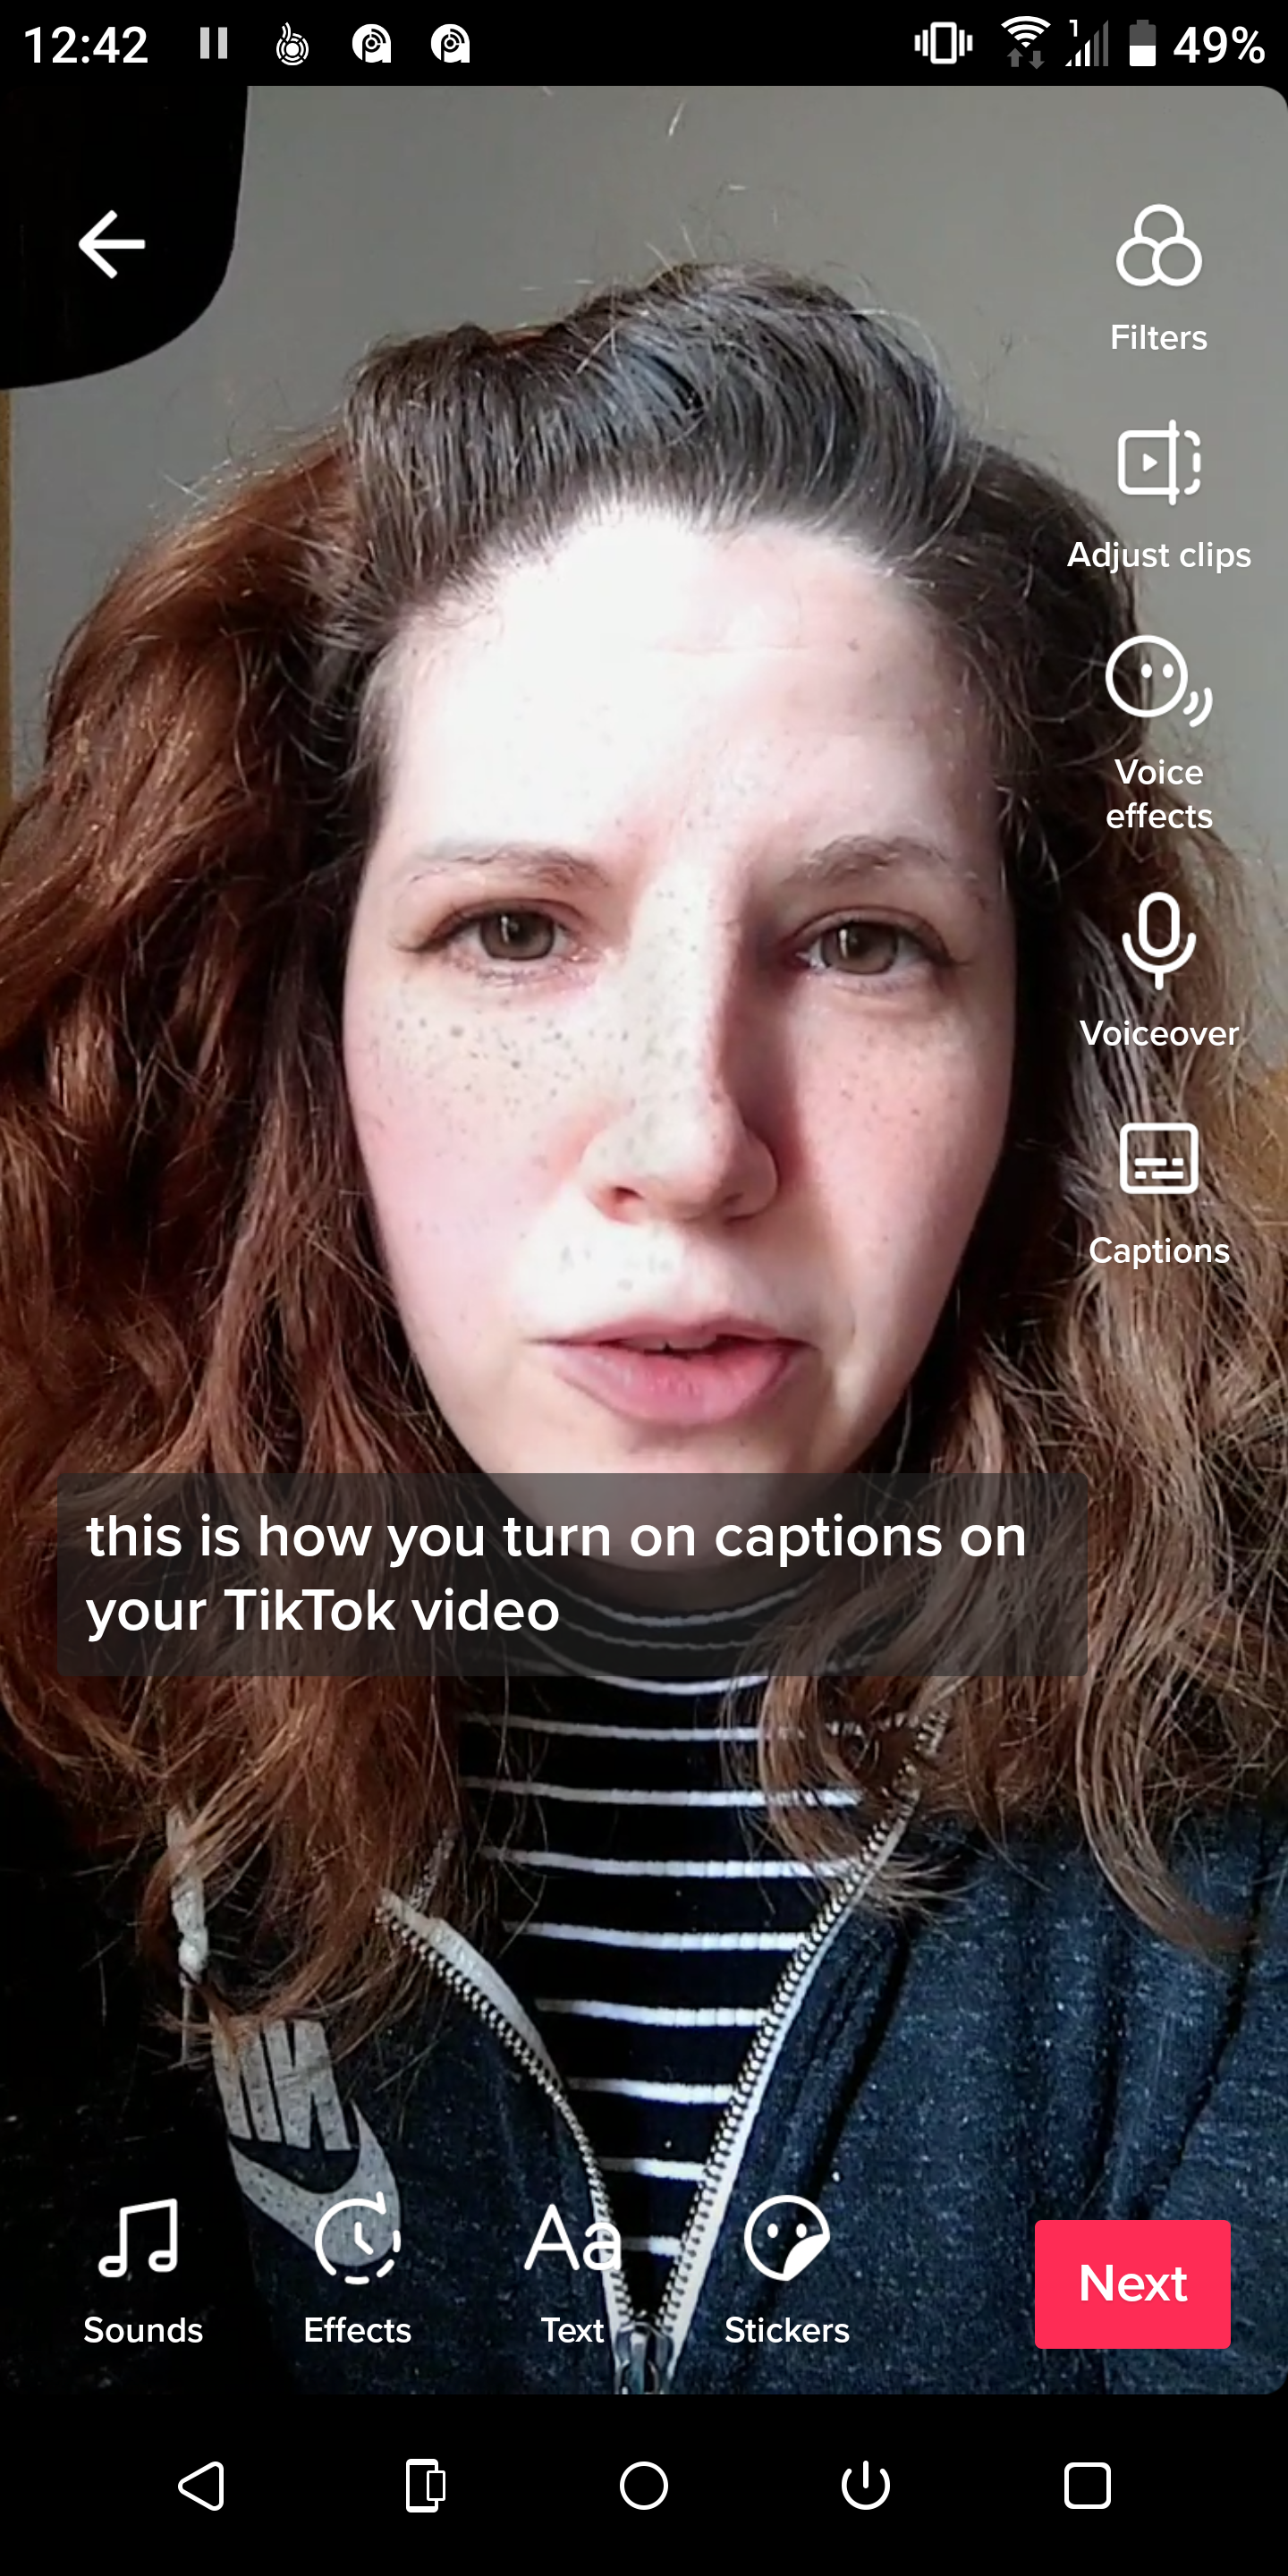 Screenshot showing a TikTok video with captions